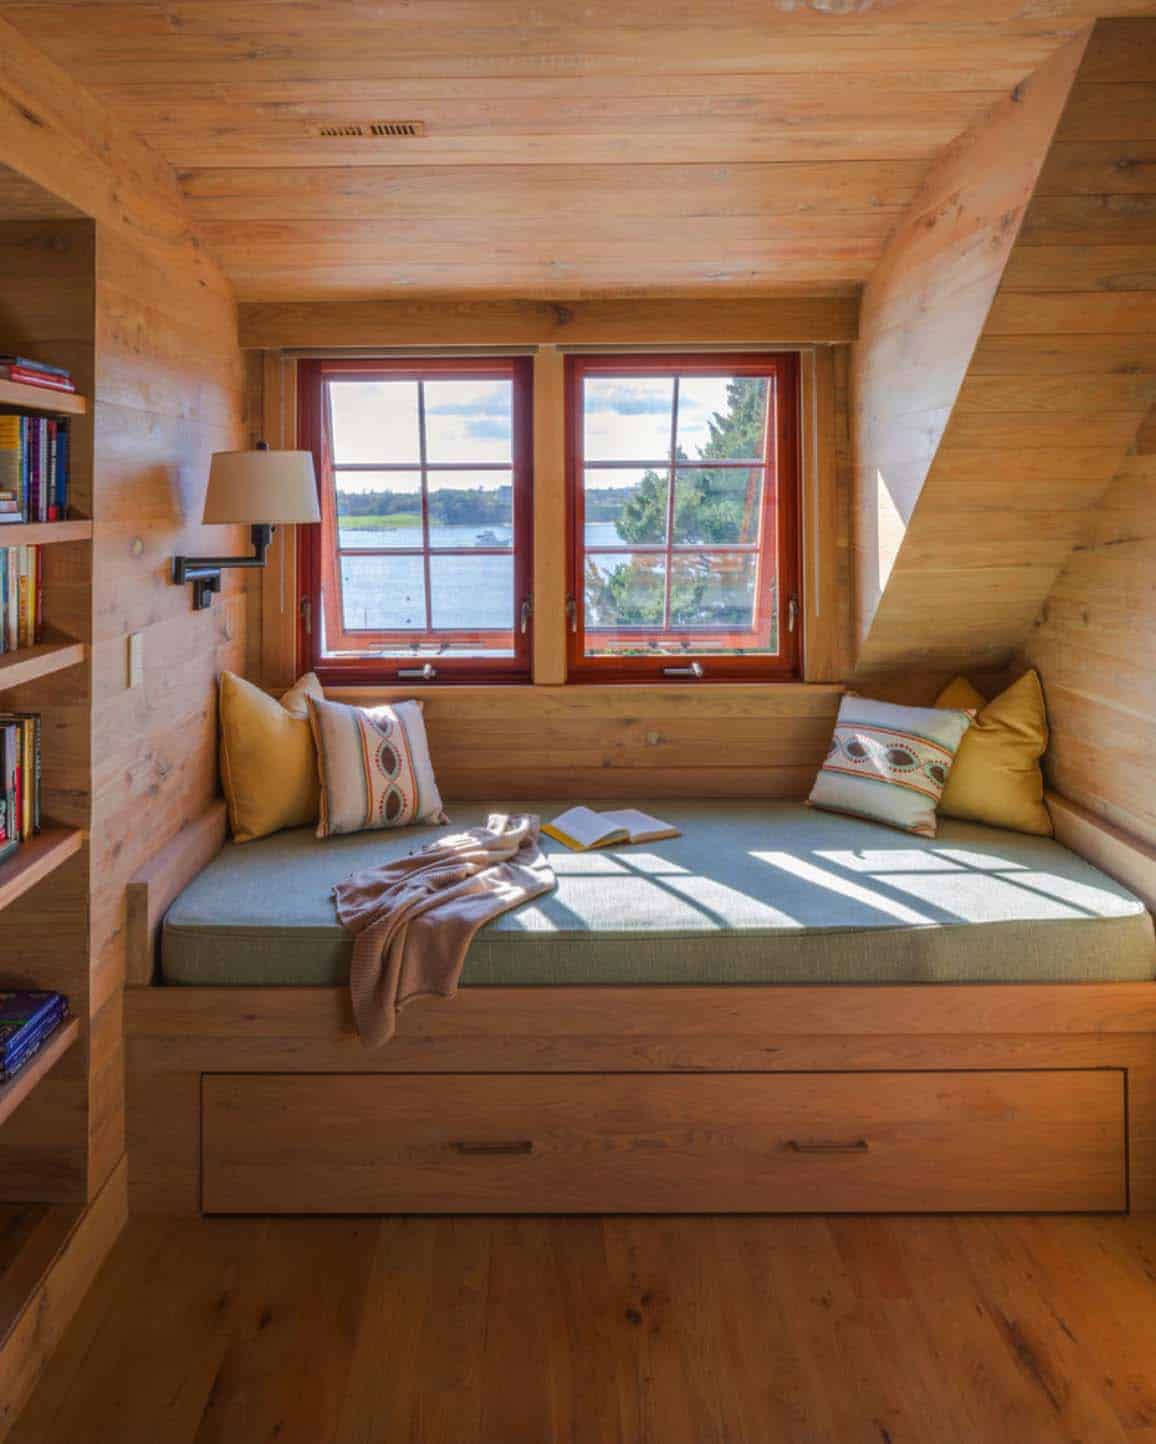 Furniture For A Cozy Reading Nook